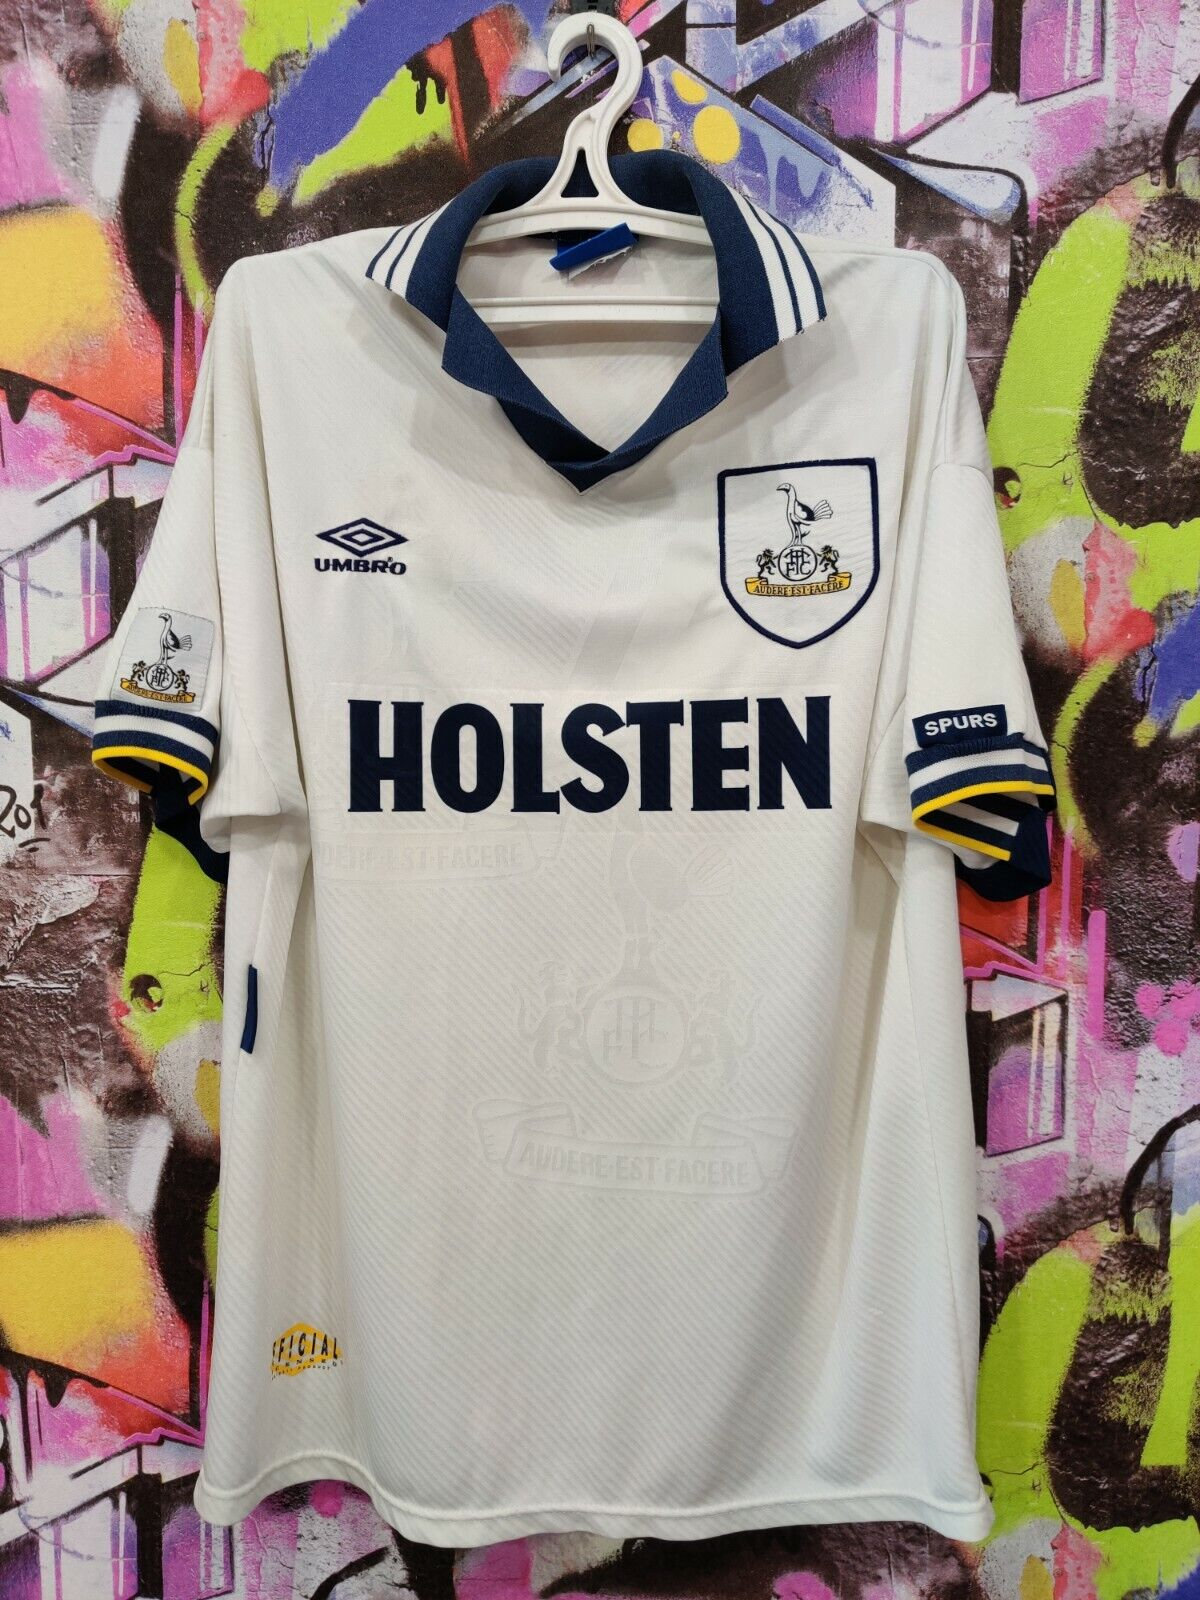 Umbro Tottenham Home 1993-1995 Jersey - USED Condition (Very Good) - Size  Large